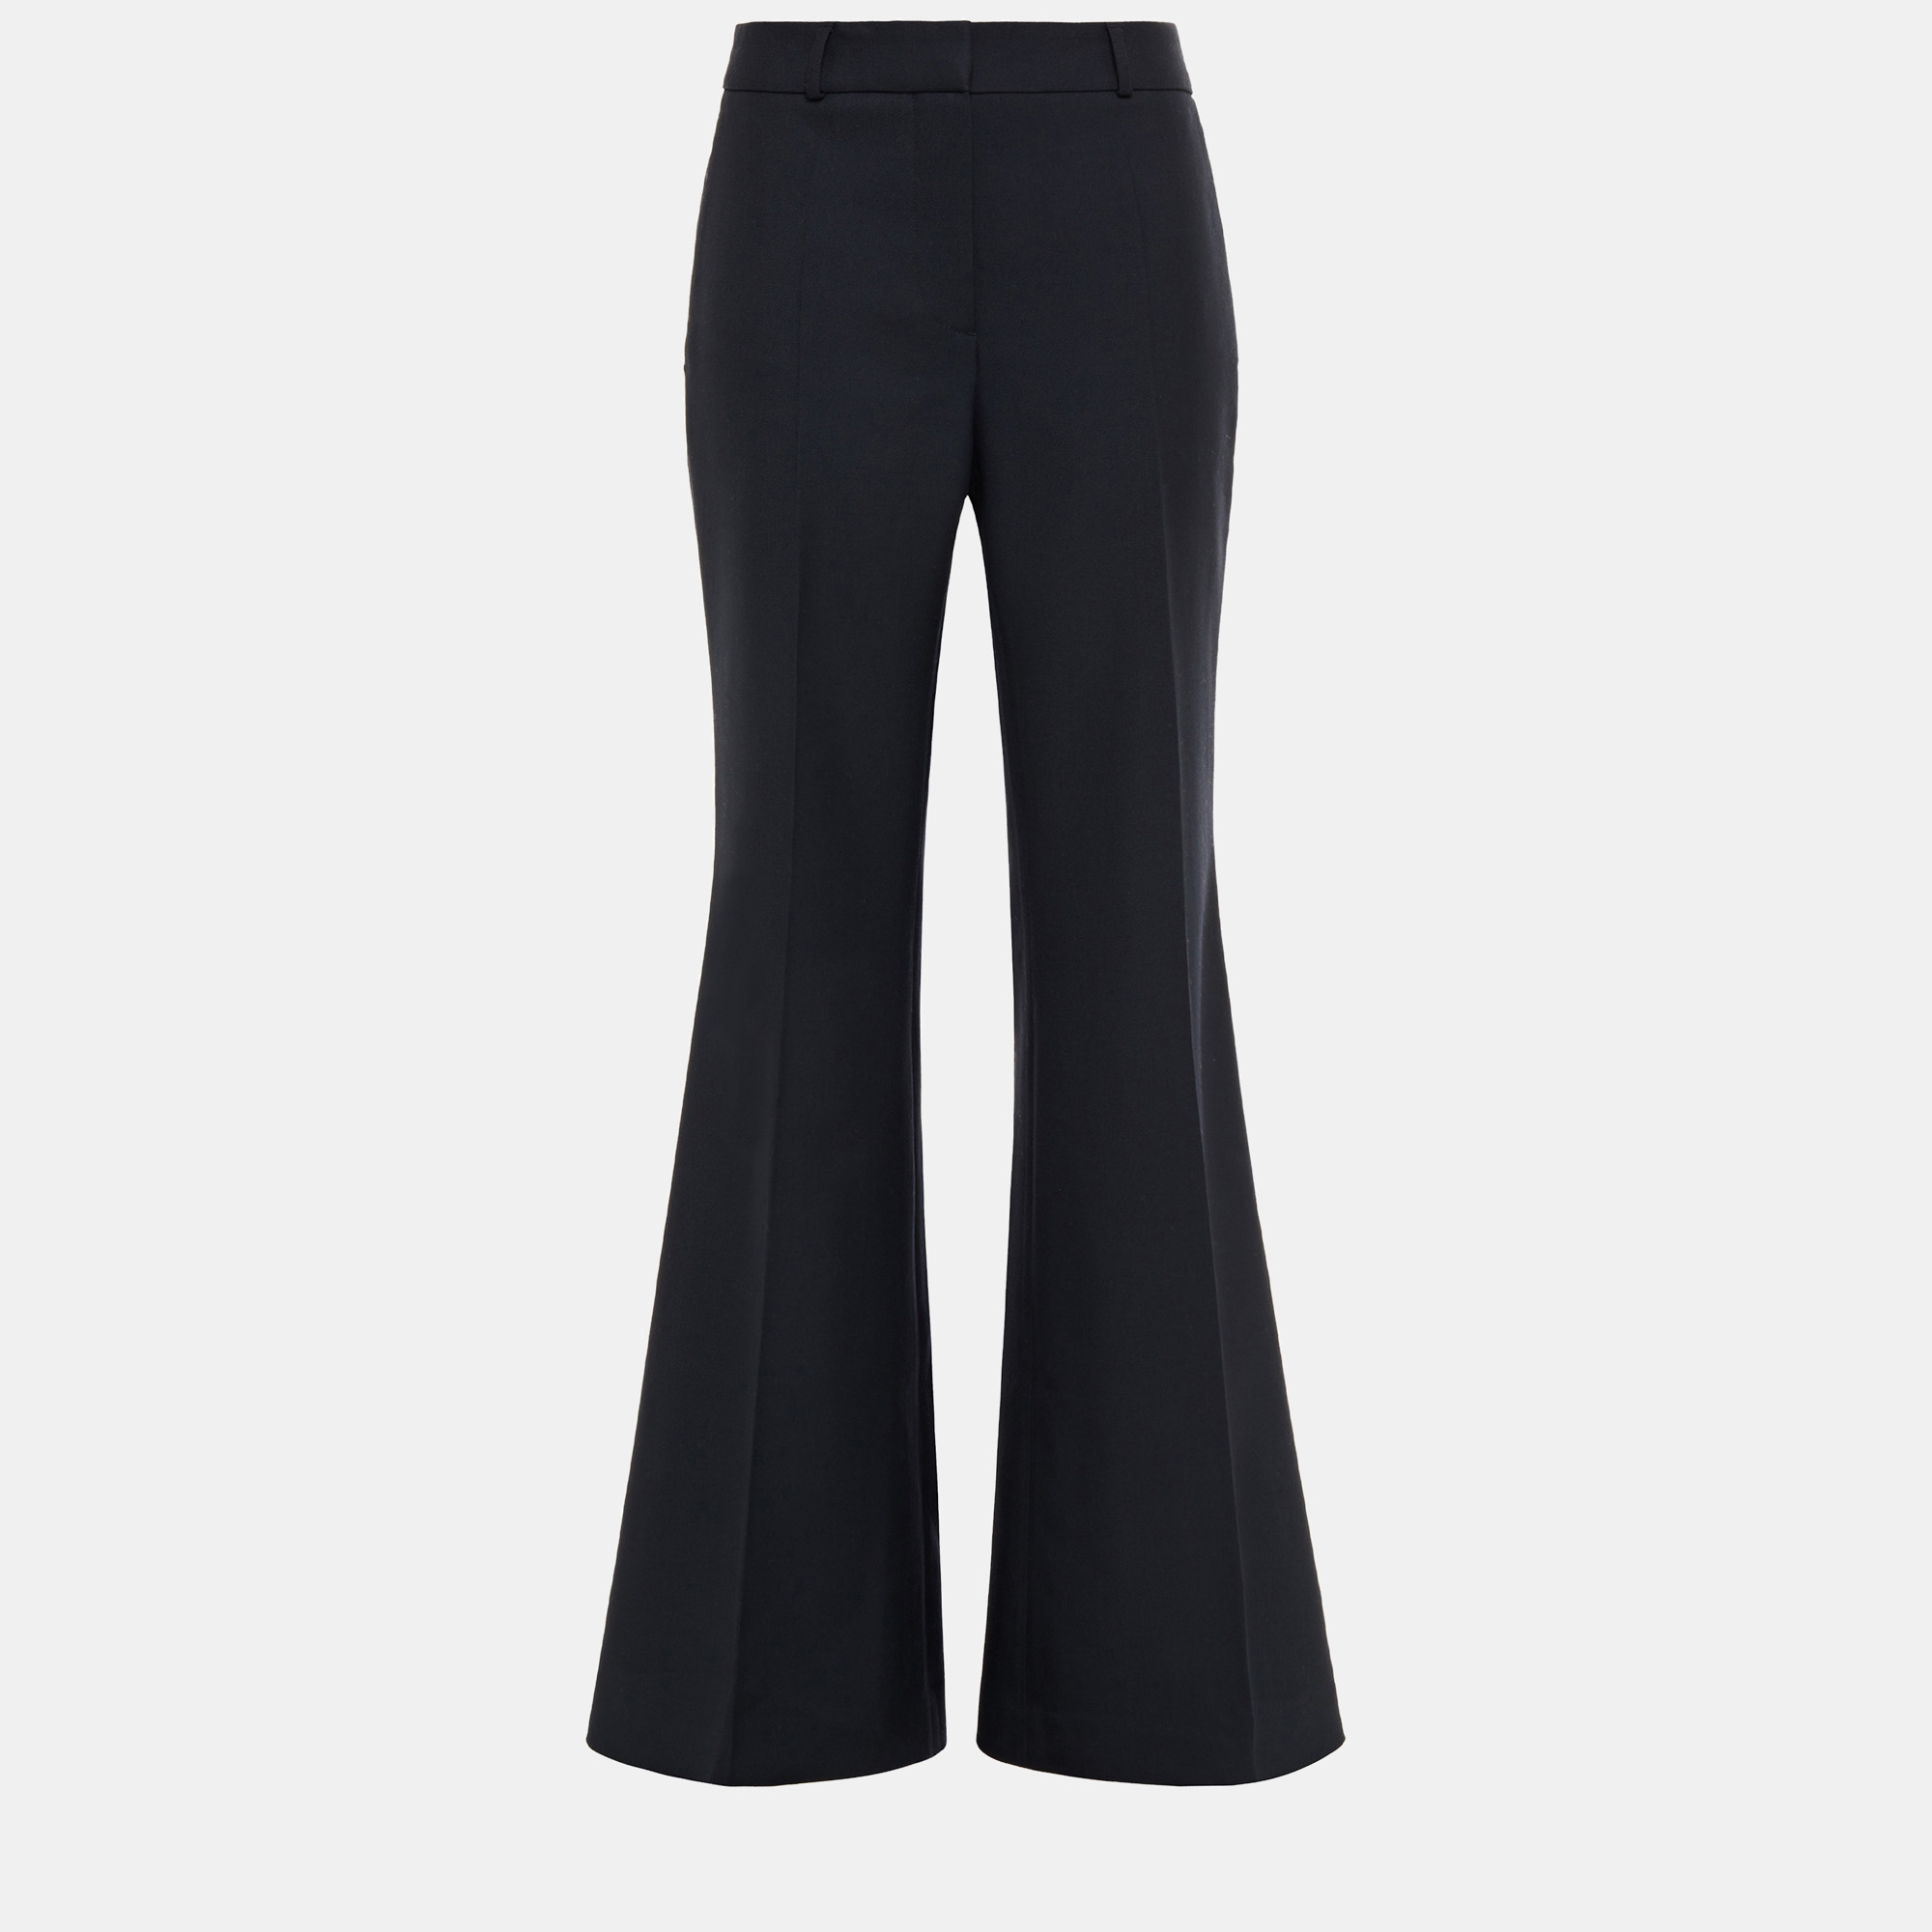 Pre-owned Burberry Black Wool Flared Pants Size 4